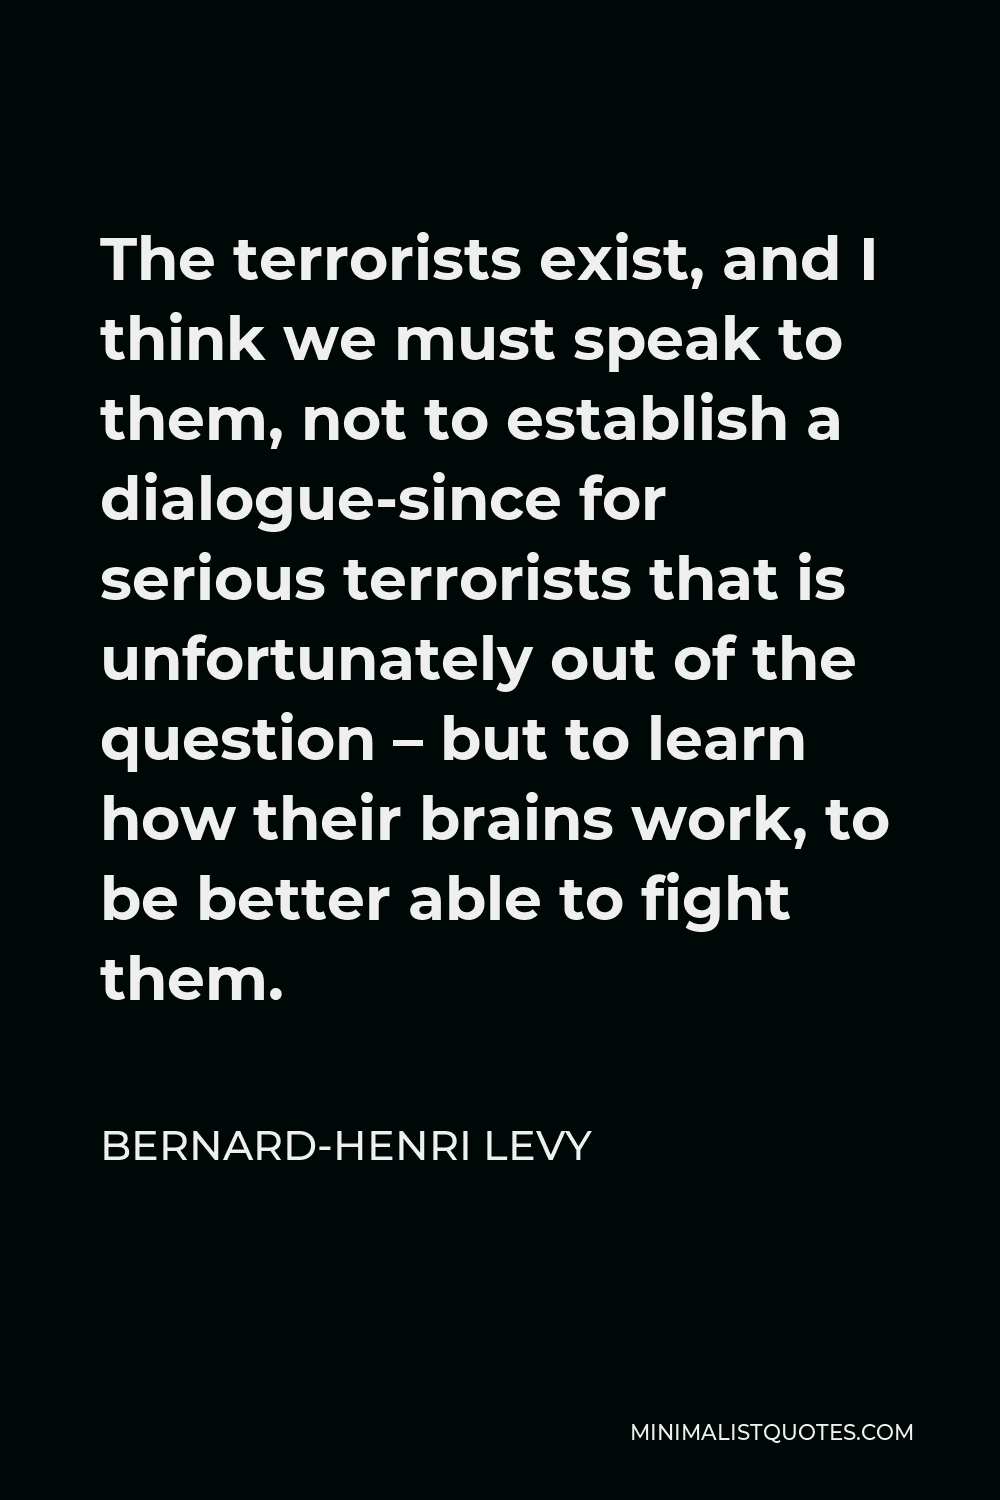 Bernard-Henri Levy Quote - The terrorists exist, and I think we must speak to them, not to establish a dialogue-since for serious terrorists that is unfortunately out of the question – but to learn how their brains work, to be better able to fight them.